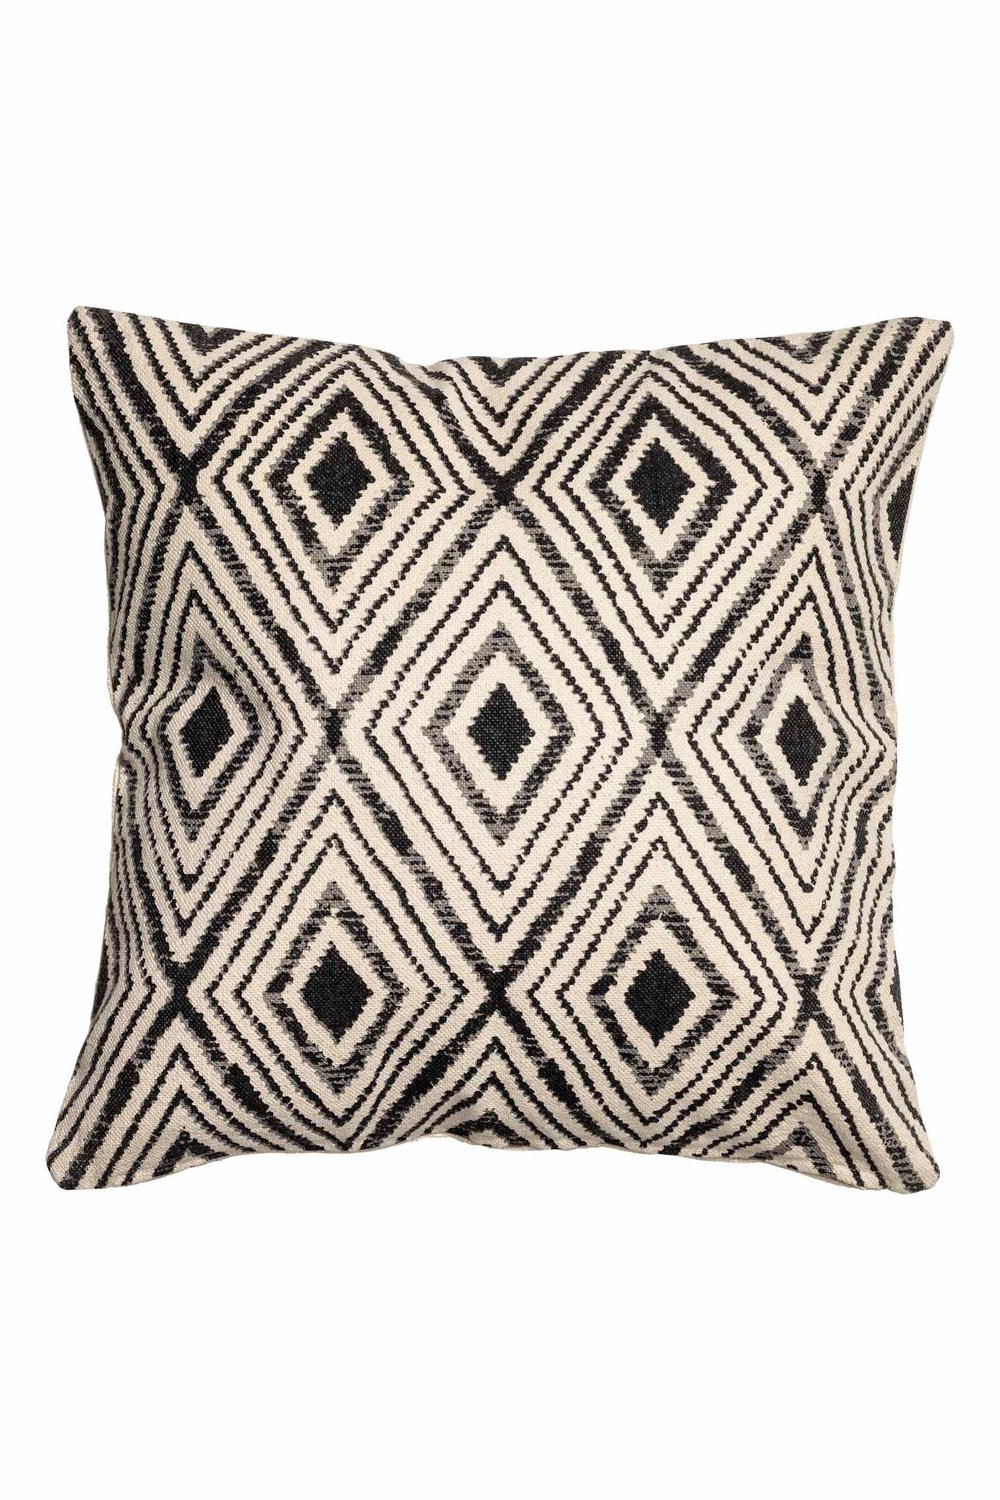 Patterned cushion cover, 20in, $15